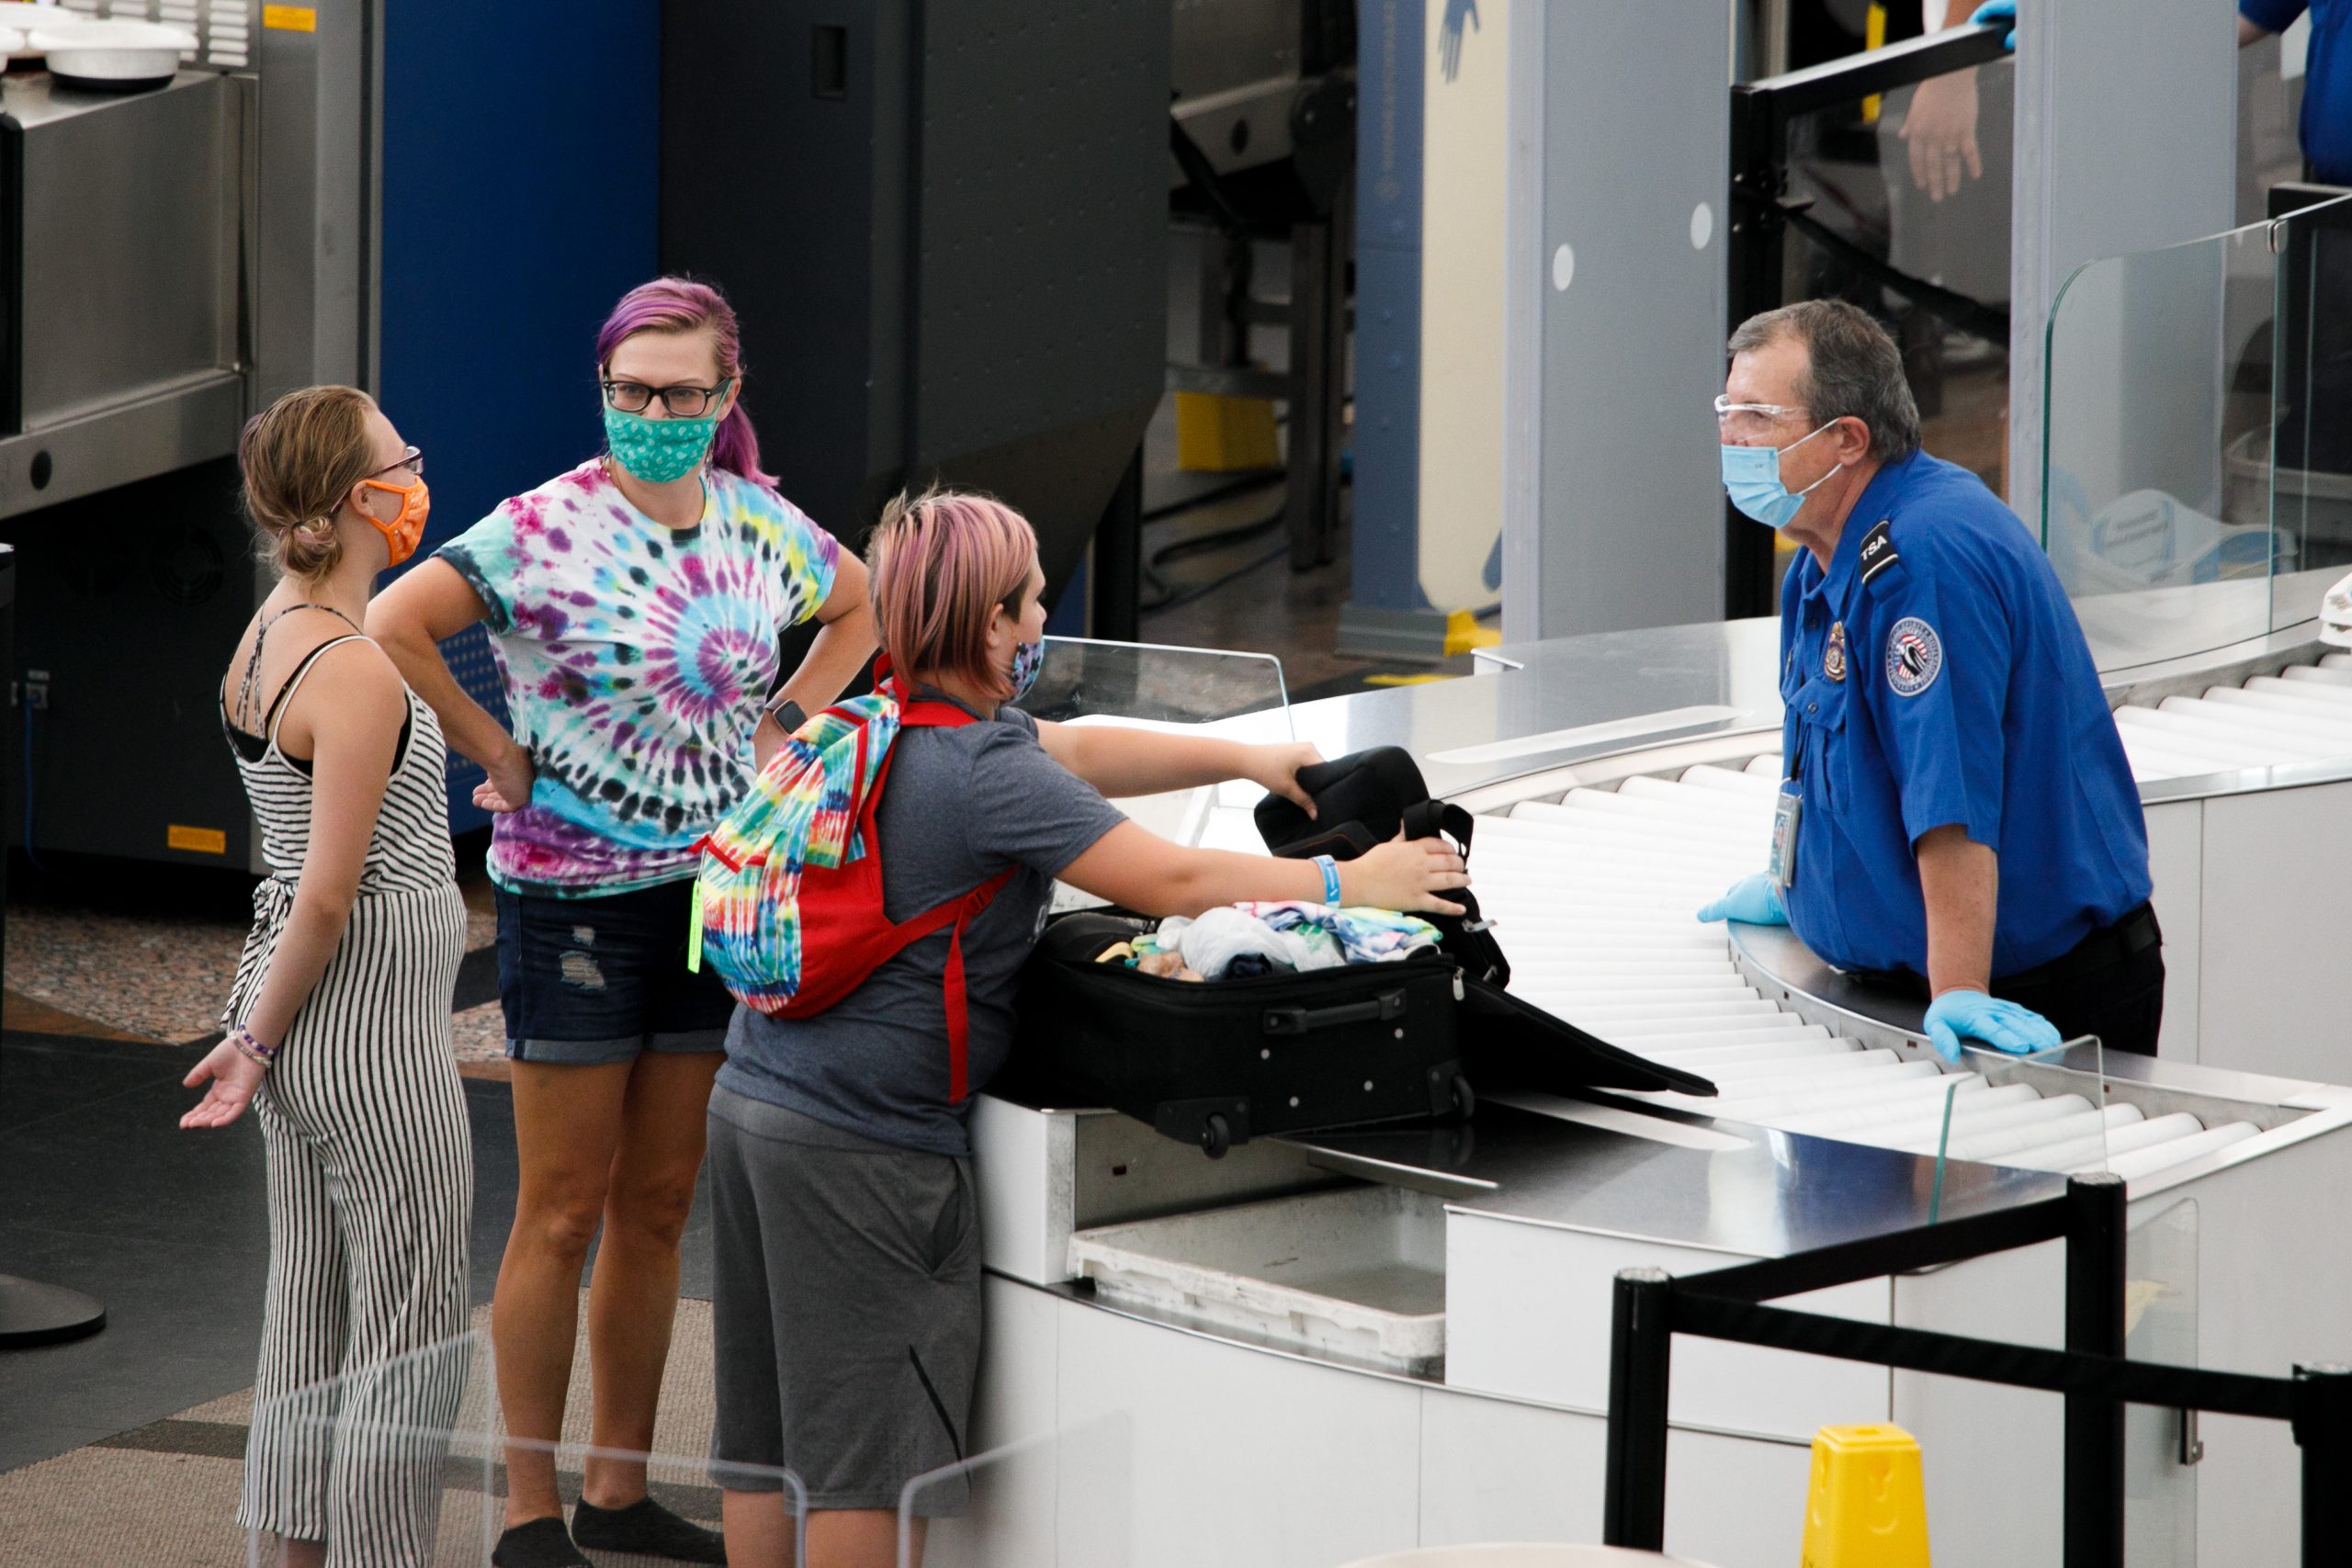 On Thursday, U.S. Air Passenger Numbers Were So High They SURPASSED 2019 Levels